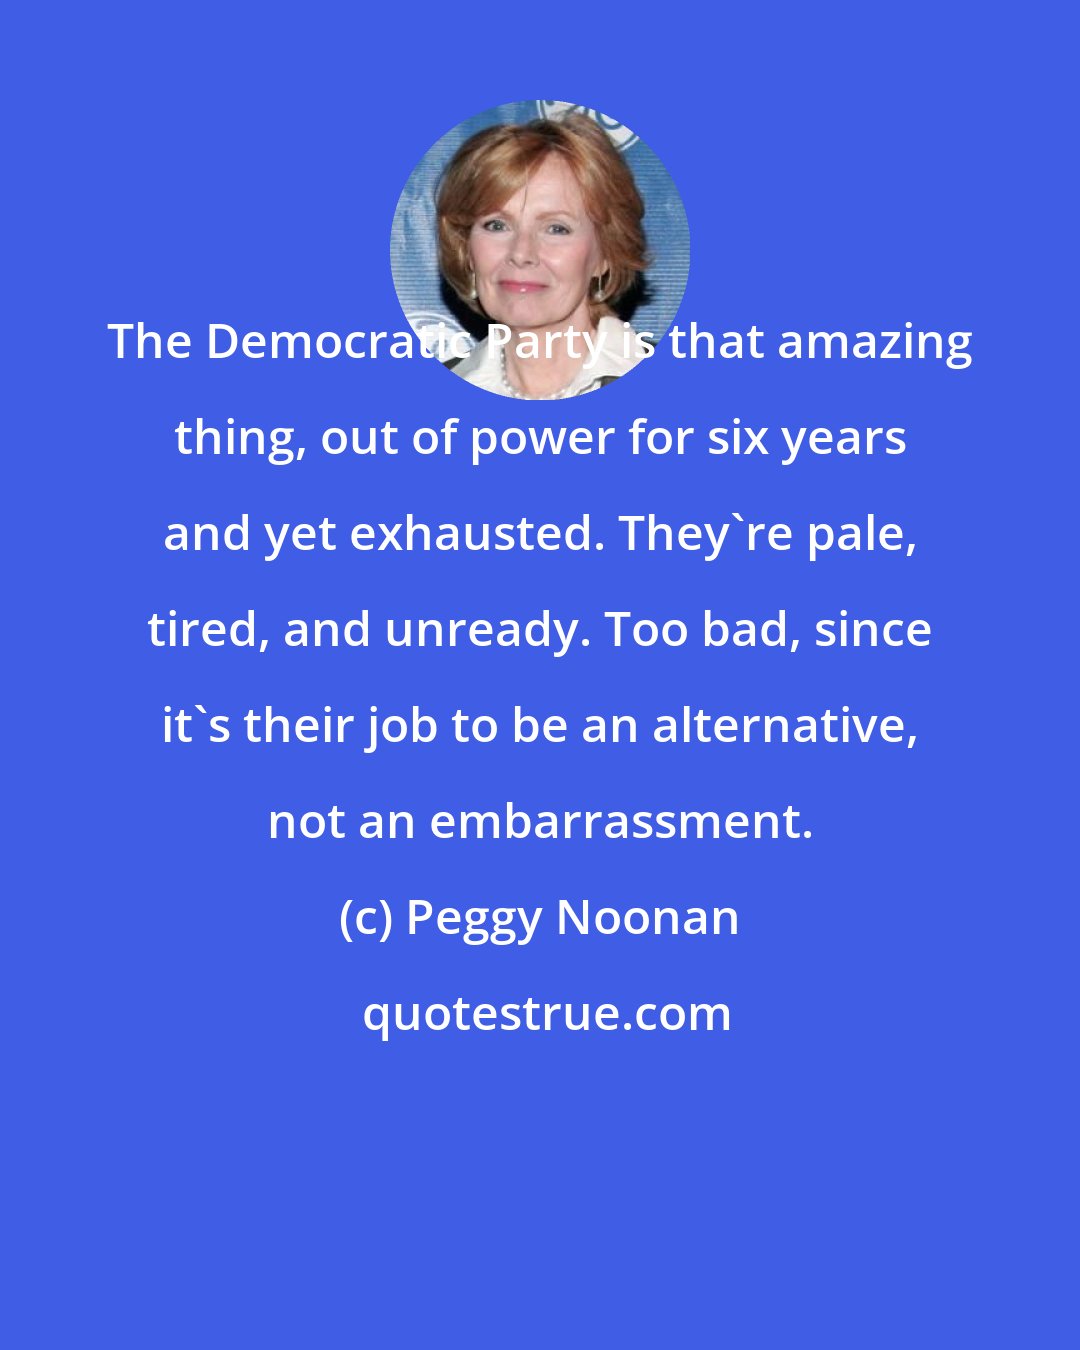 Peggy Noonan: The Democratic Party is that amazing thing, out of power for six years and yet exhausted. They're pale, tired, and unready. Too bad, since it's their job to be an alternative, not an embarrassment.